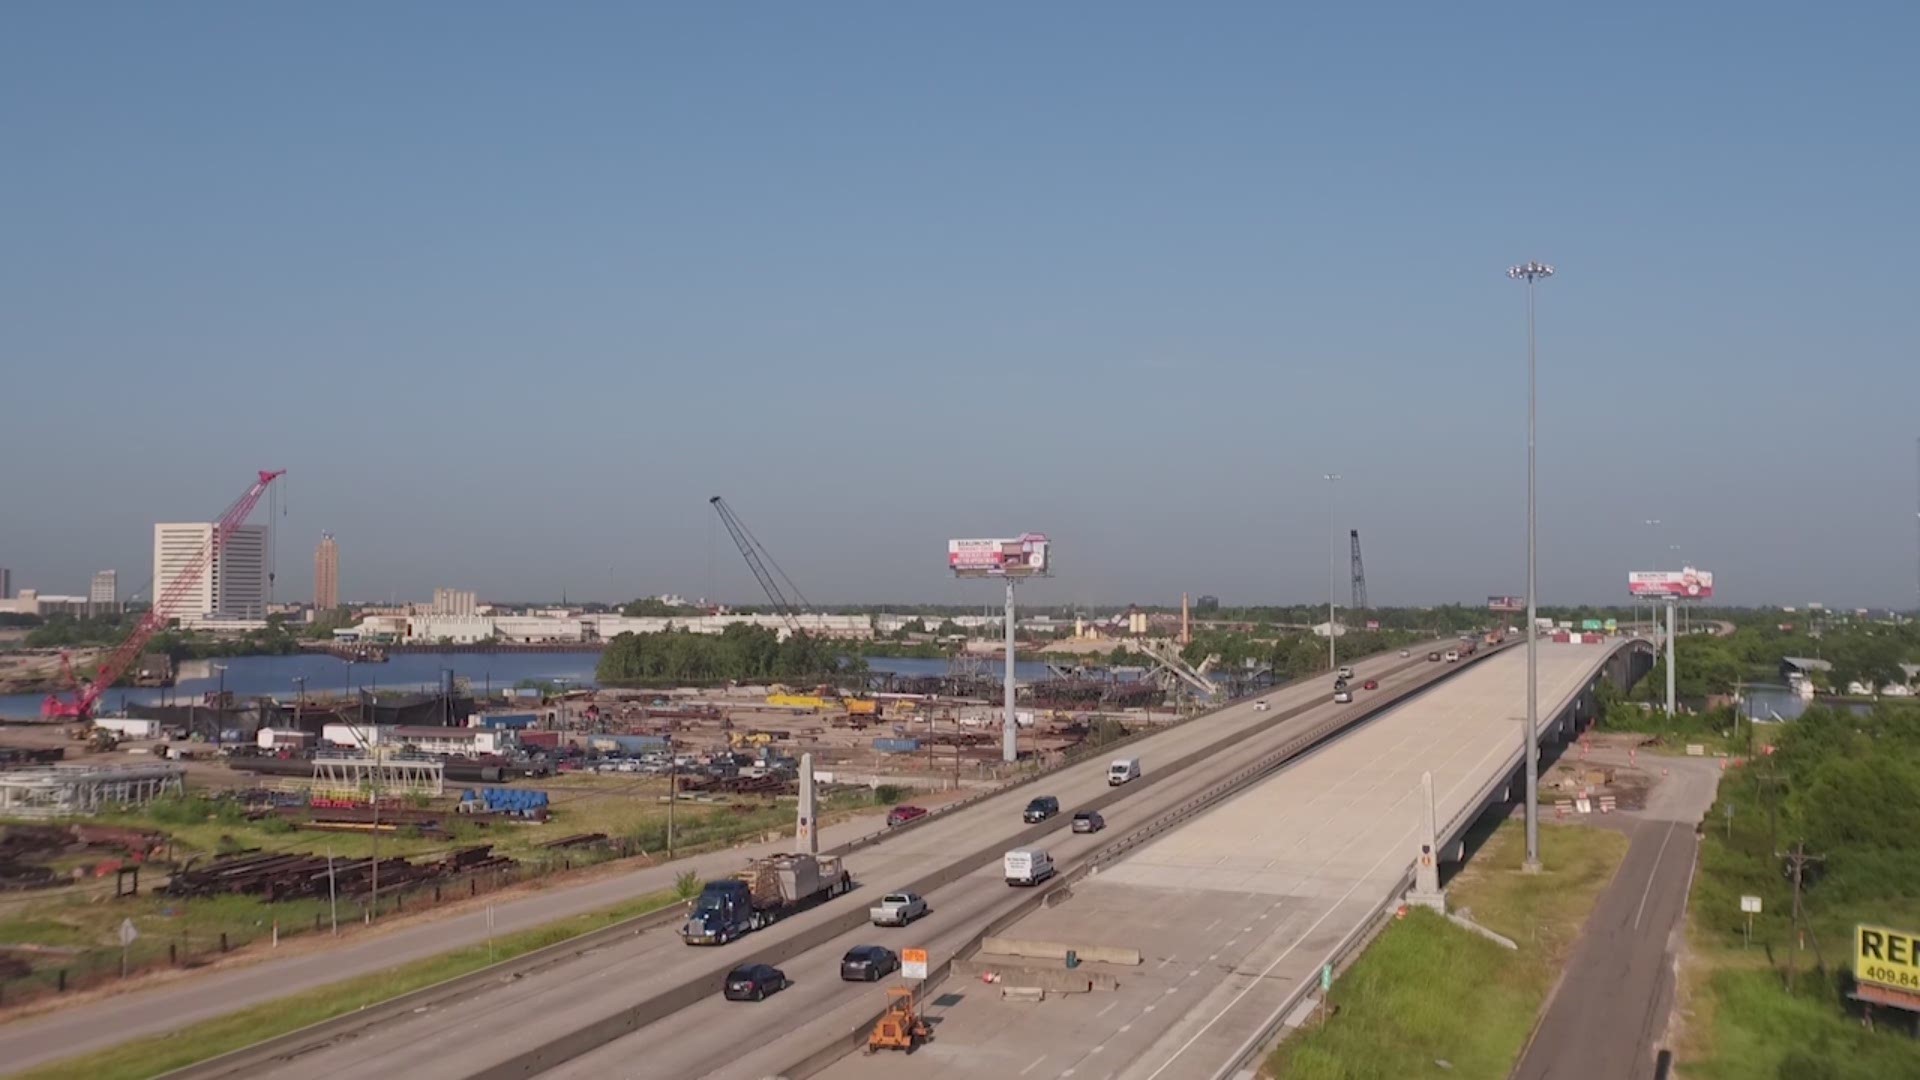 TxDOT says they're on track to open up the new westbound lanes of the Purple Heart Memorial Bridge on Interstate 10 by the end of August 2018.